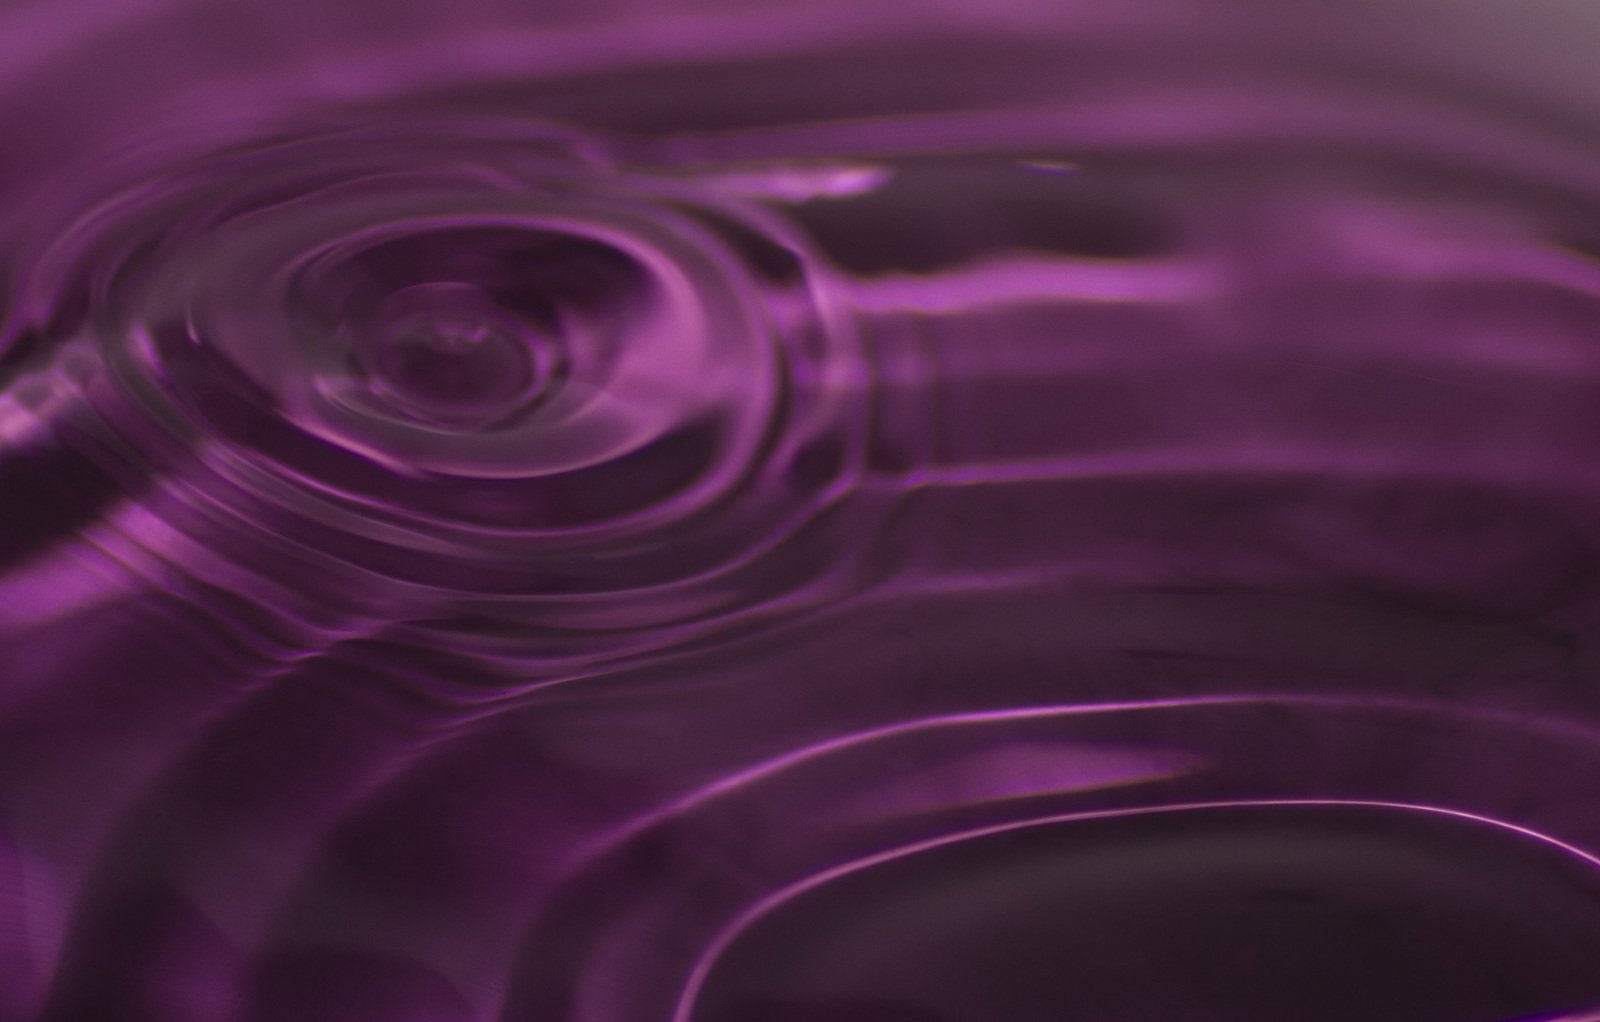 the image shows water bubbles and purple hues